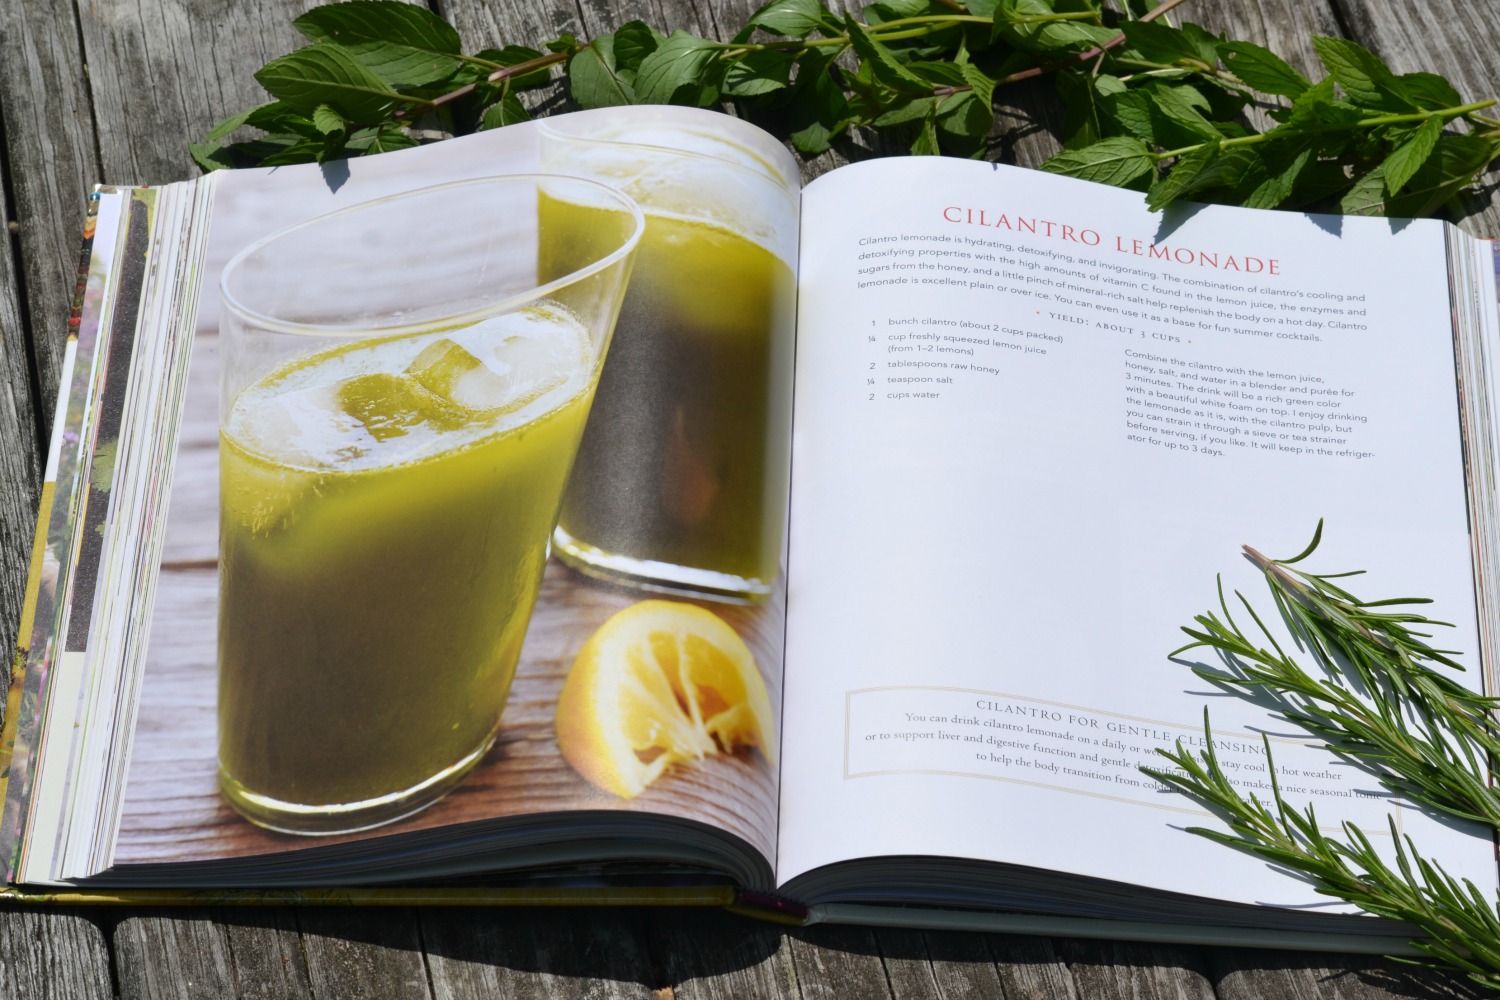 Book Review: Recipes from the Herbalist’s Kitchen by Brittany Wood Nickerson | Herbal Academy | Love food? Love herbs? Love cookbooks? Then you'll love this one! Come check out our review of this brand new herbal cookbook!